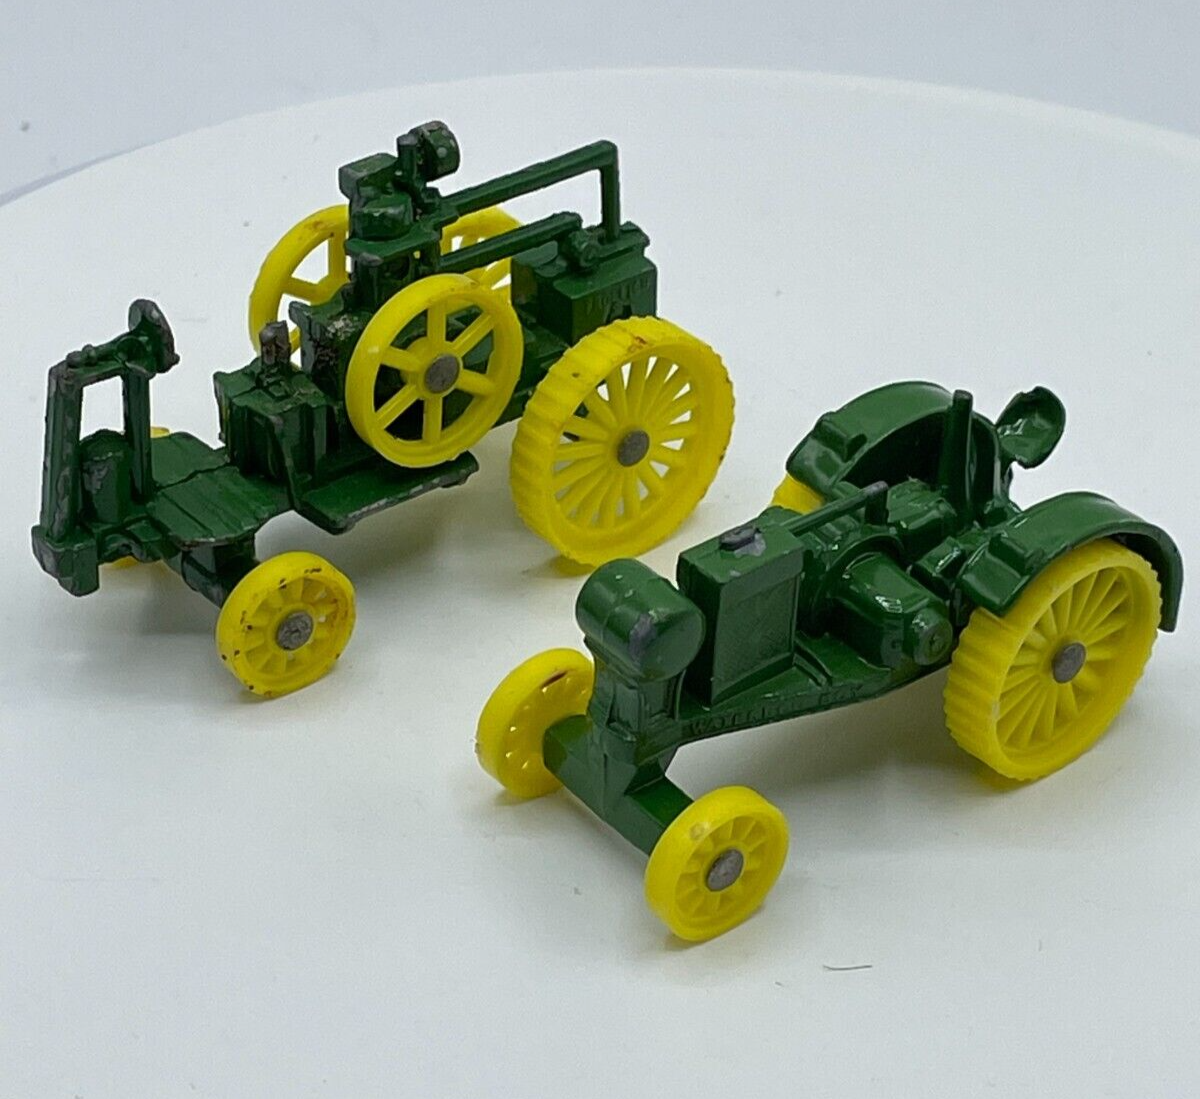 Vintage ERTL 1892 Froelich Tractors Diecast John Deere Made in the USA Lot of 2 - $9.49